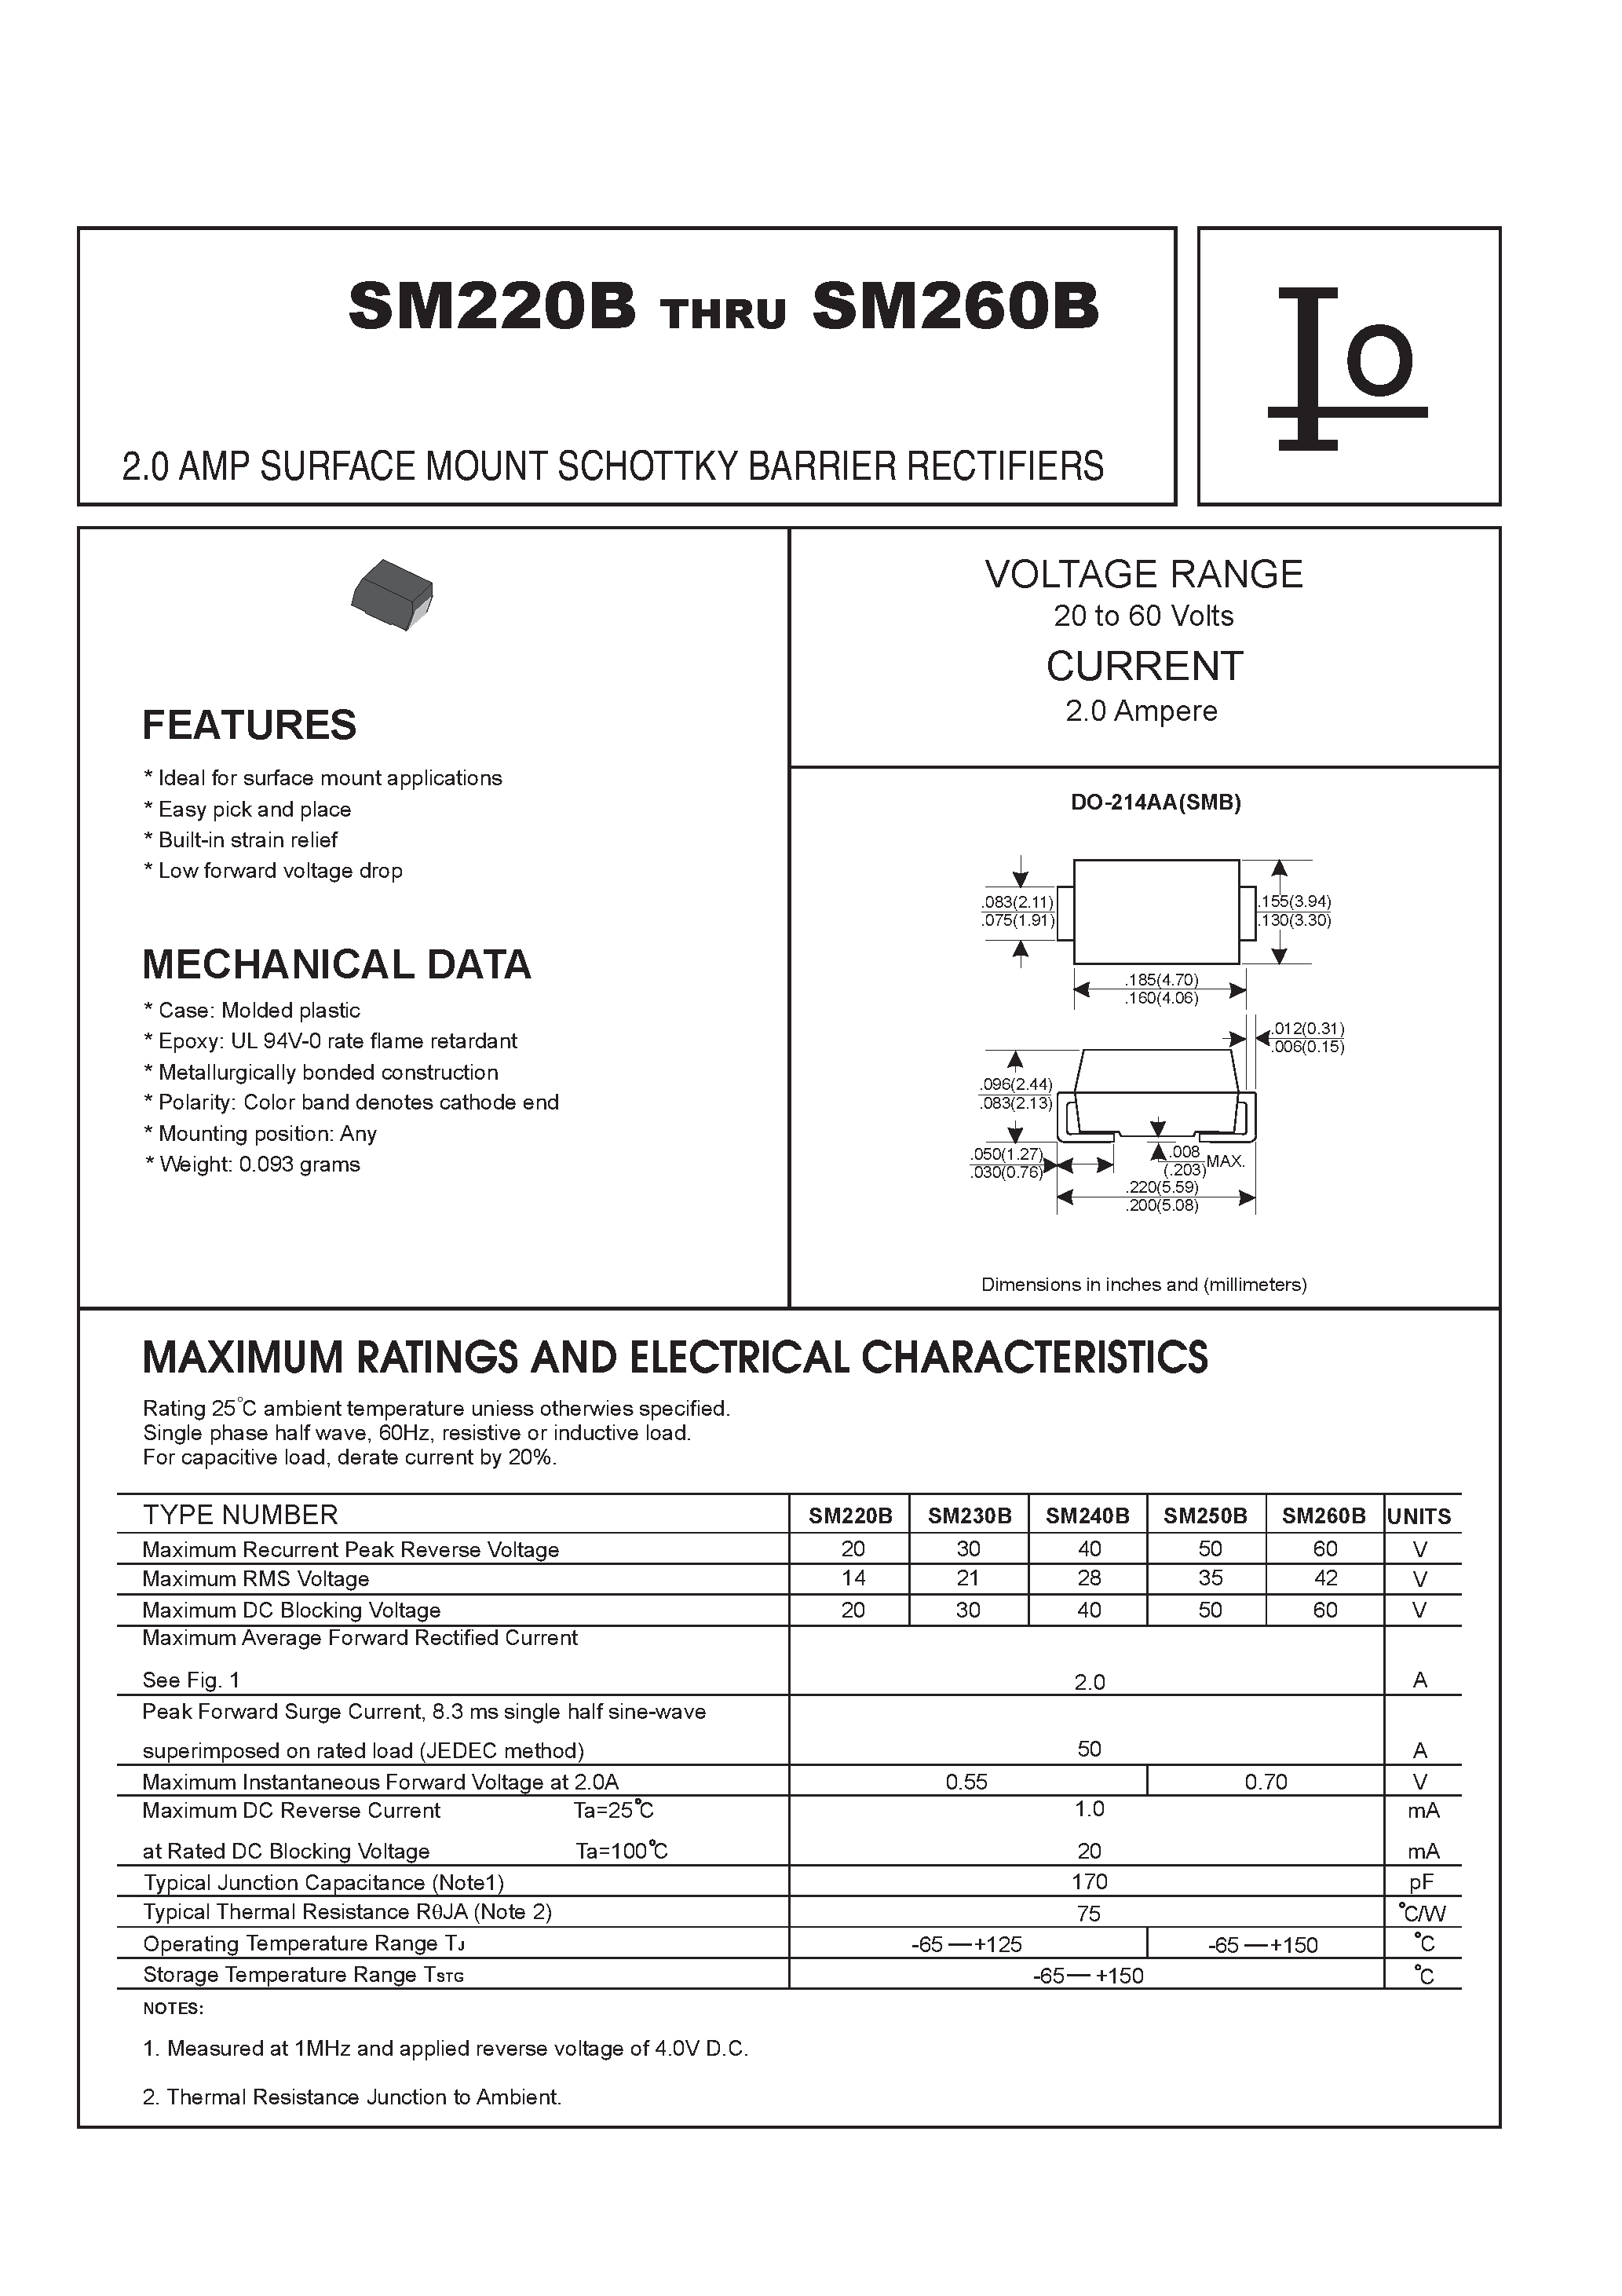 Datasheet SM250B - 2.0 AMP SURFACE MOUNT SCHOTTKY BARRIER RECTIFIERS page 1